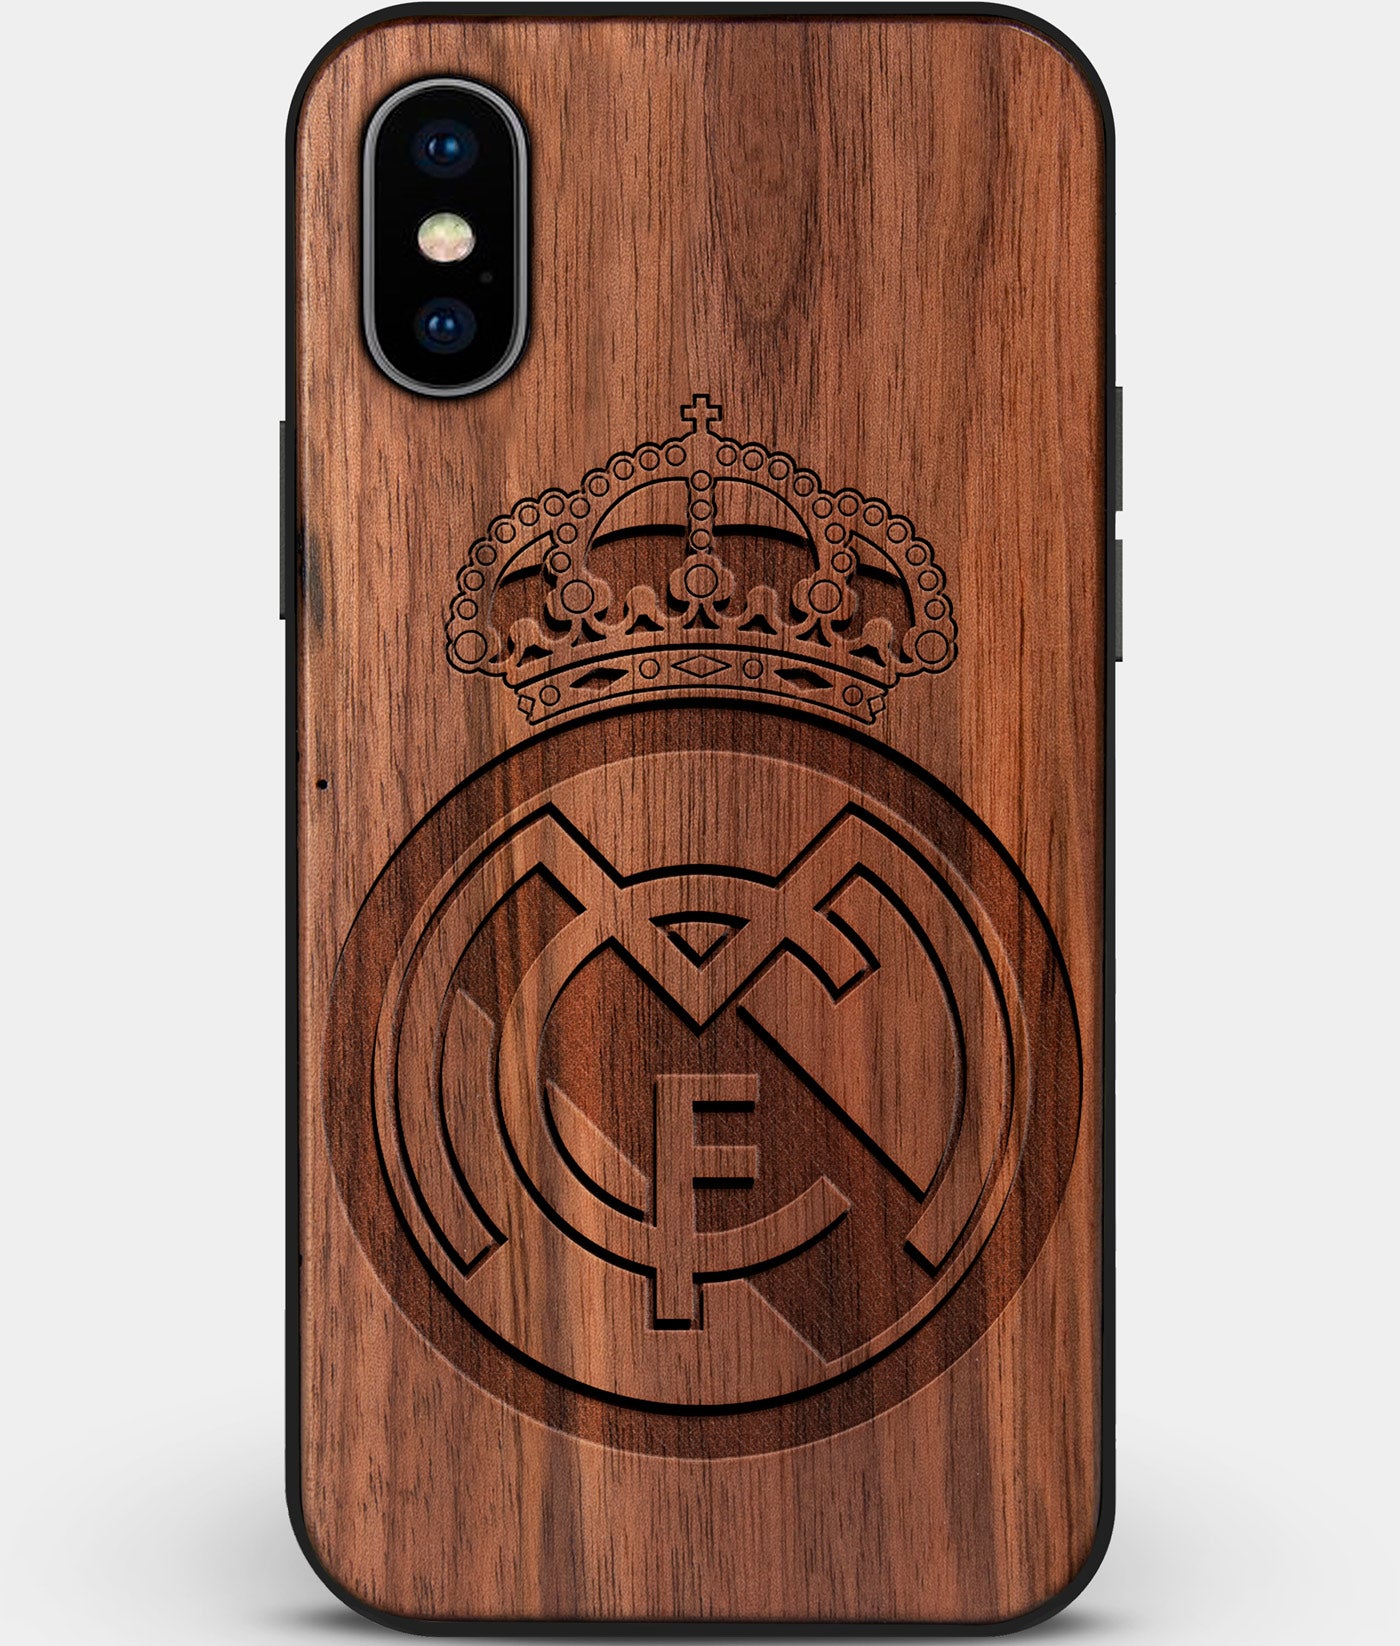 Custom Carved Wood Real Madrid C.F. iPhone X/XS Case | Personalized Walnut Wood Real Madrid C.F. Cover, Birthday Gift, Gifts For Him, Monogrammed Gift For Fan | by Engraved In Nature